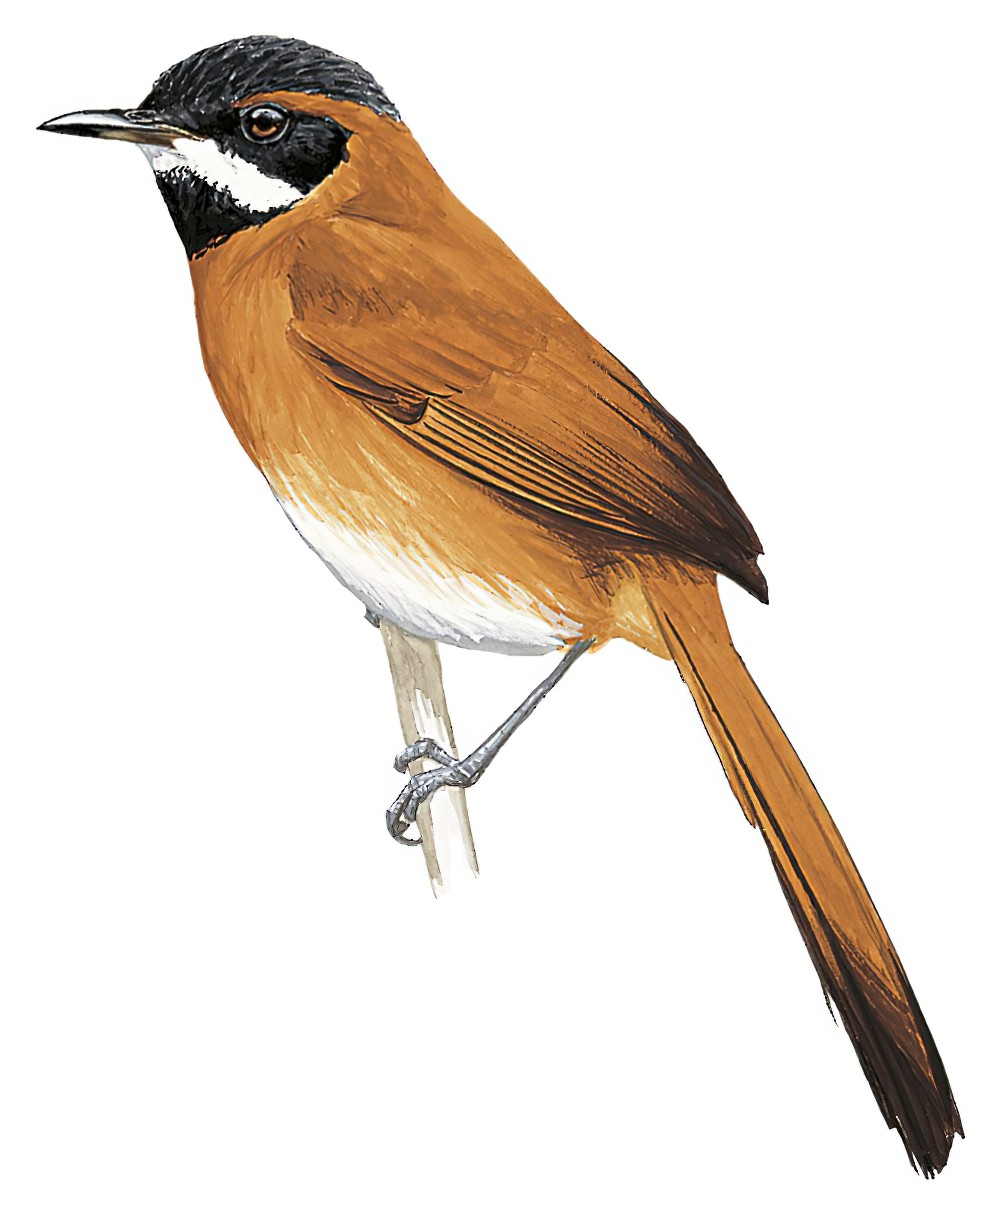 White-whiskered Spinetail / Synallaxis candei